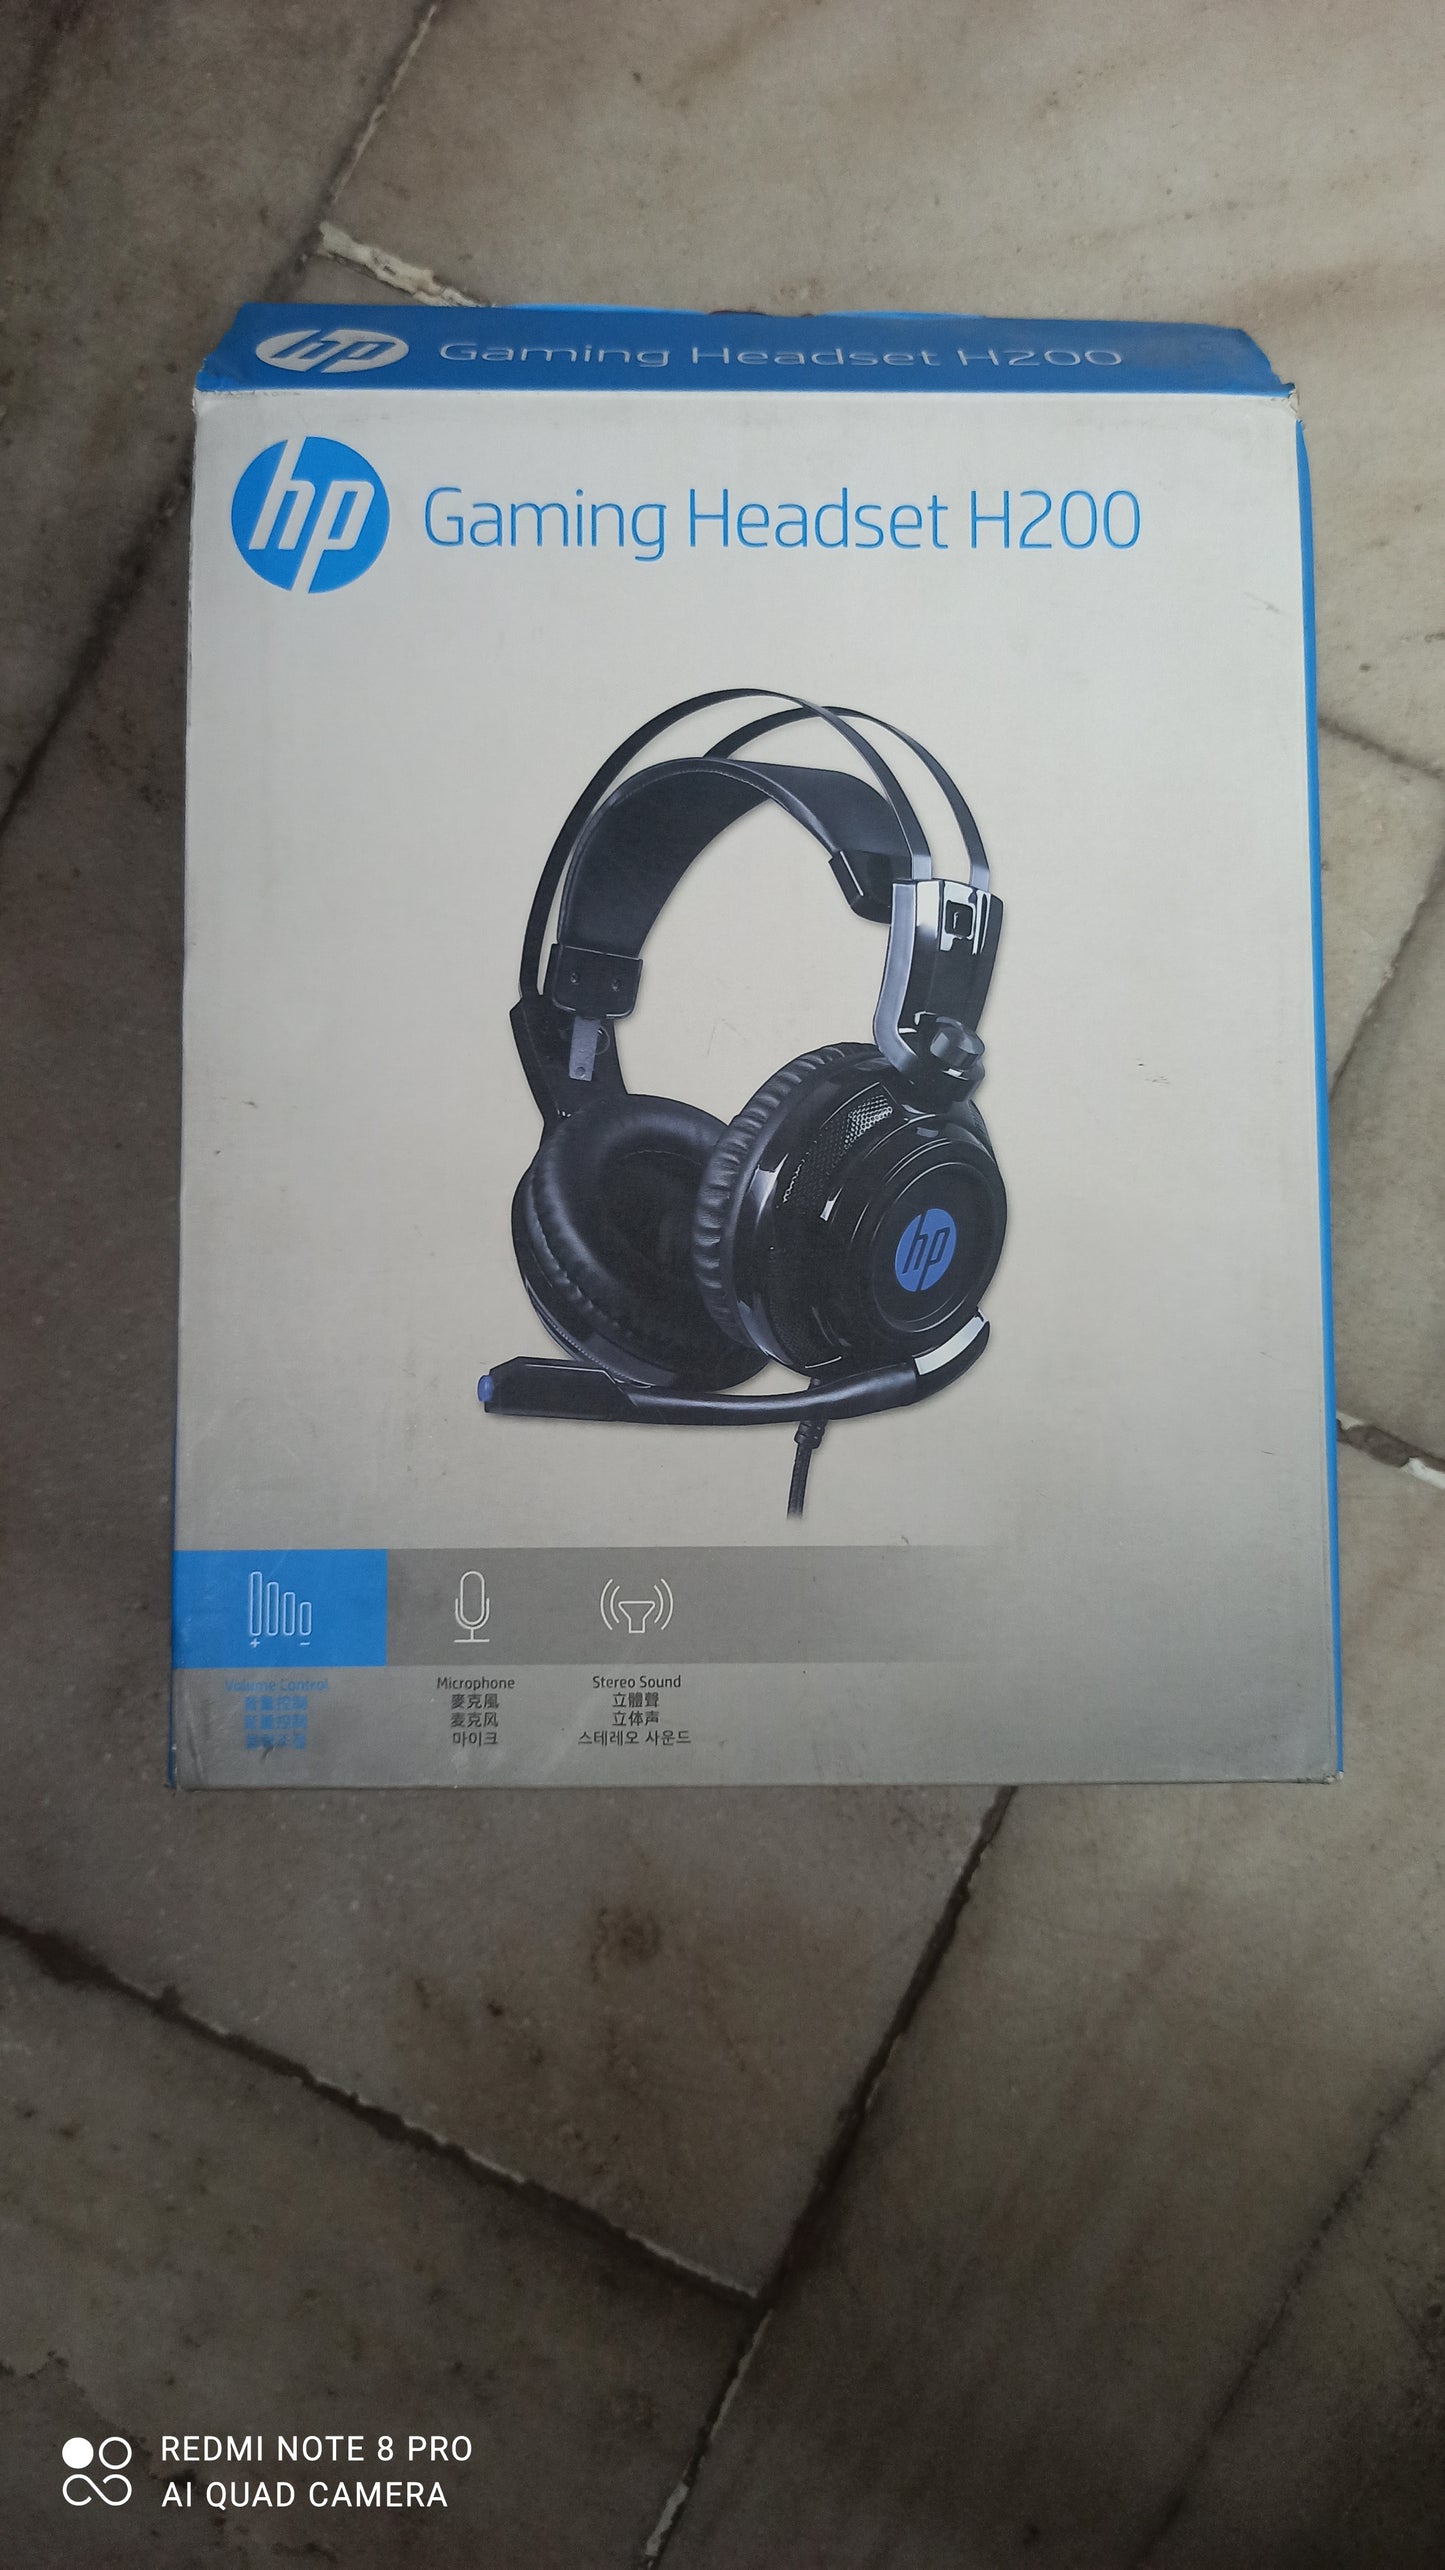 HP H200 Wired Gaming Over Ear Headphone with Mic